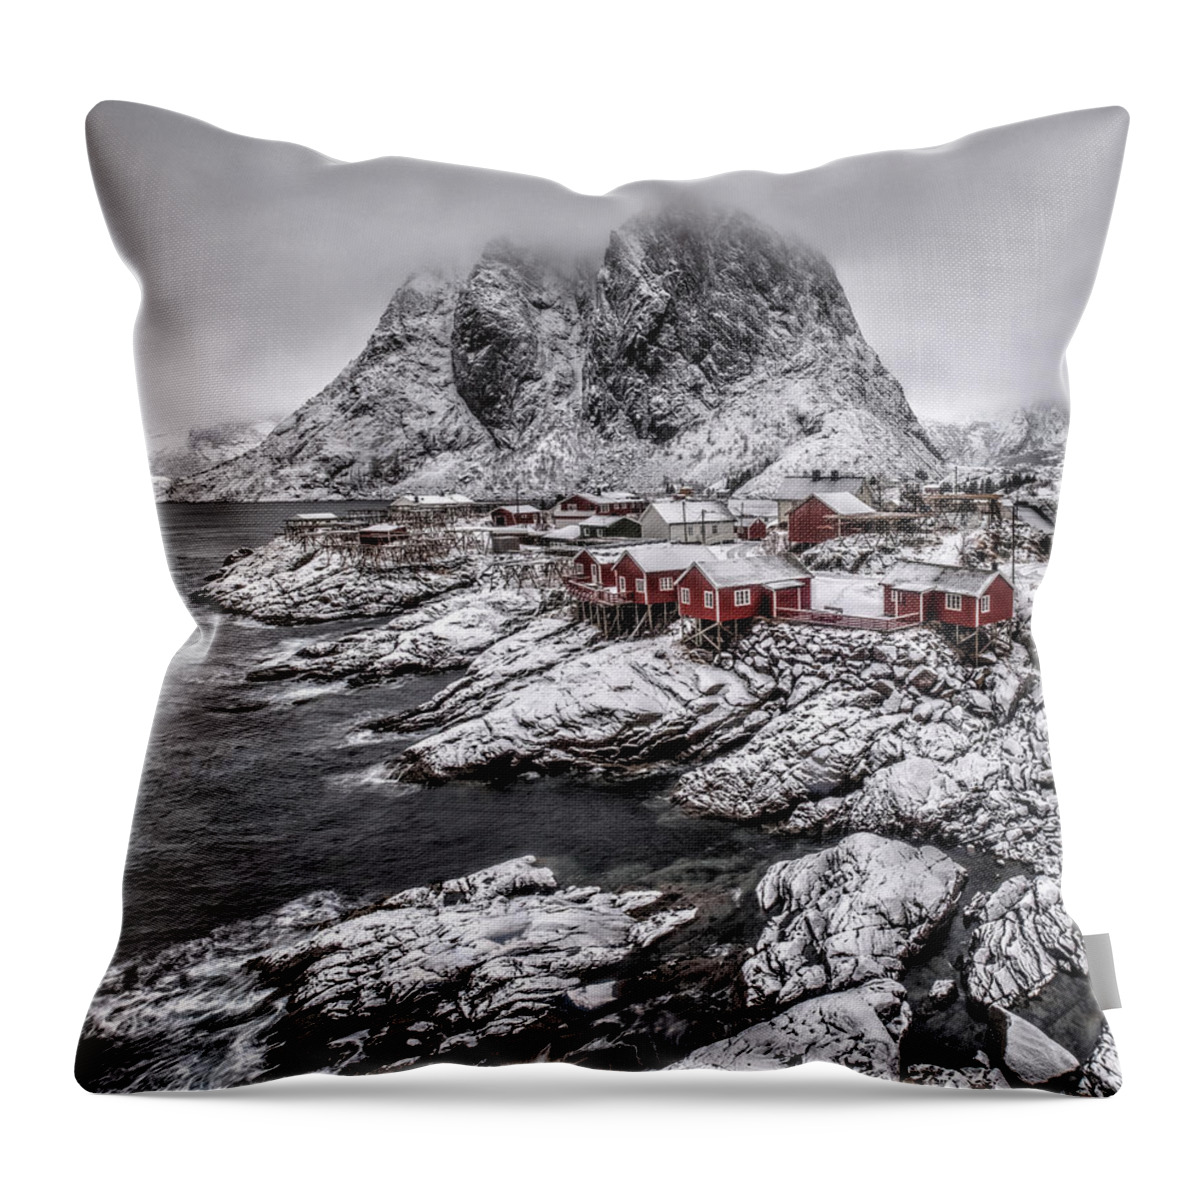 Hamnoy Throw Pillow featuring the photograph Hamnoy Snow Scene by Roberta Kayne